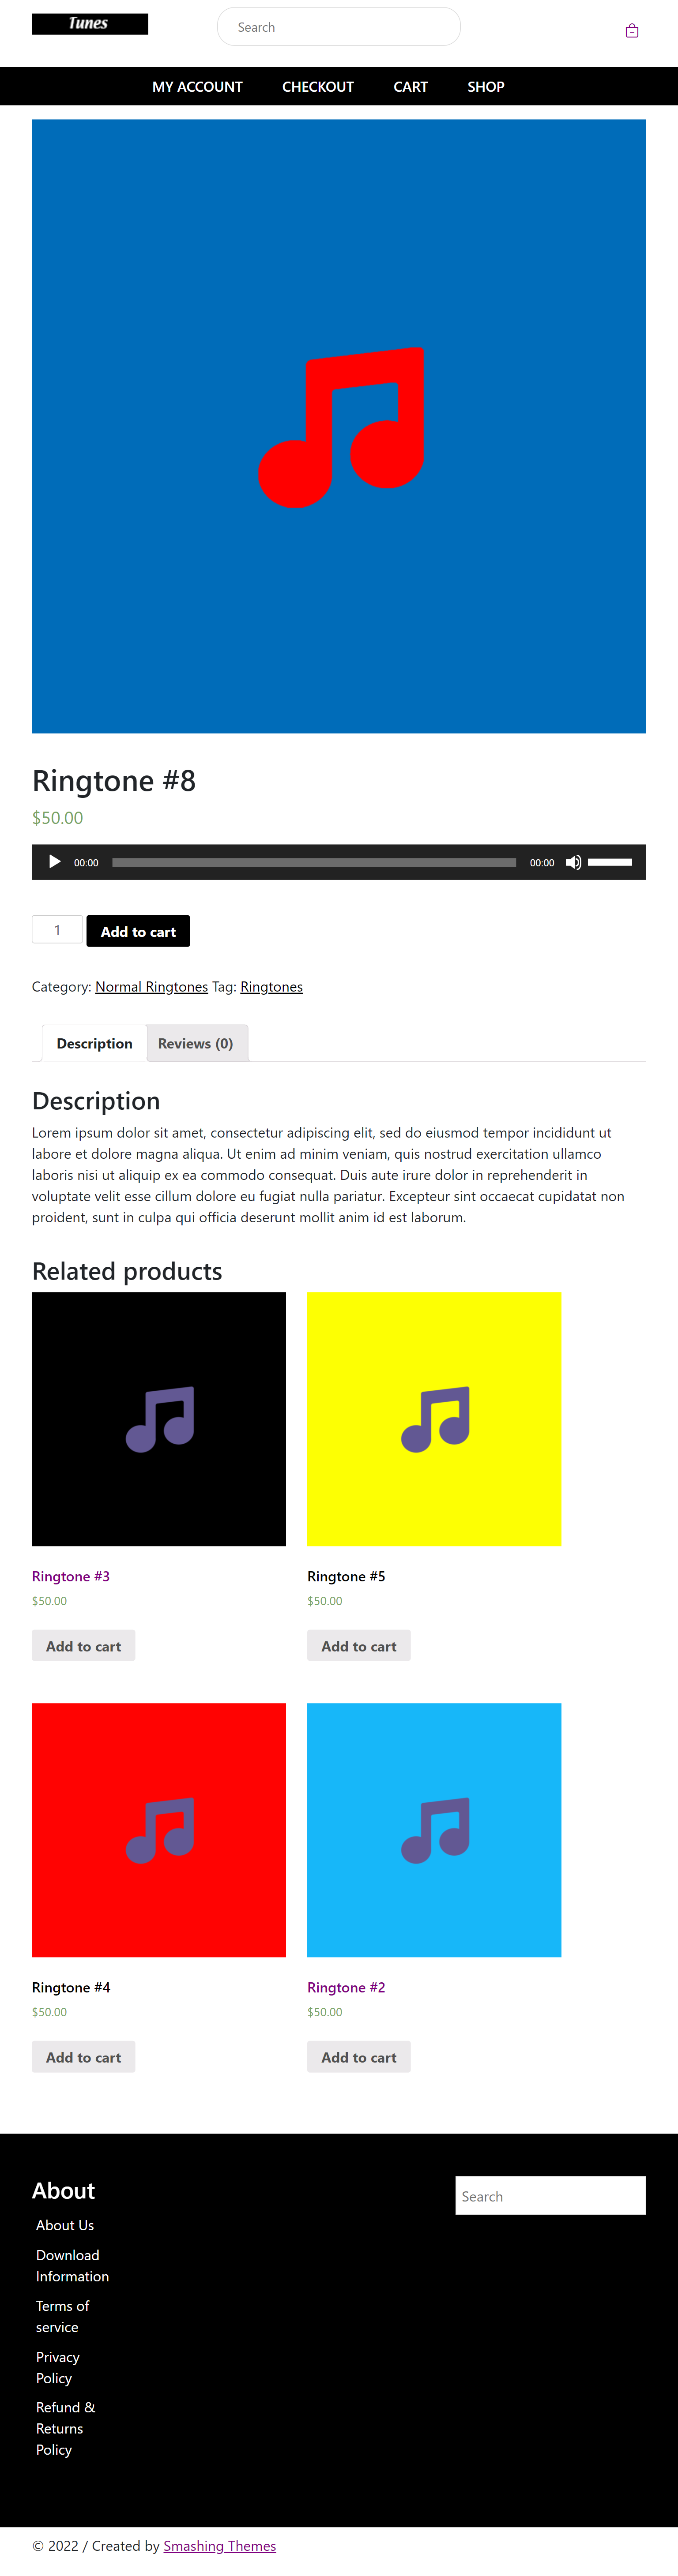 Tunes WordPress Theme for Audio Files- Product Page Screenshot for iPad Mini (768px_1024px)